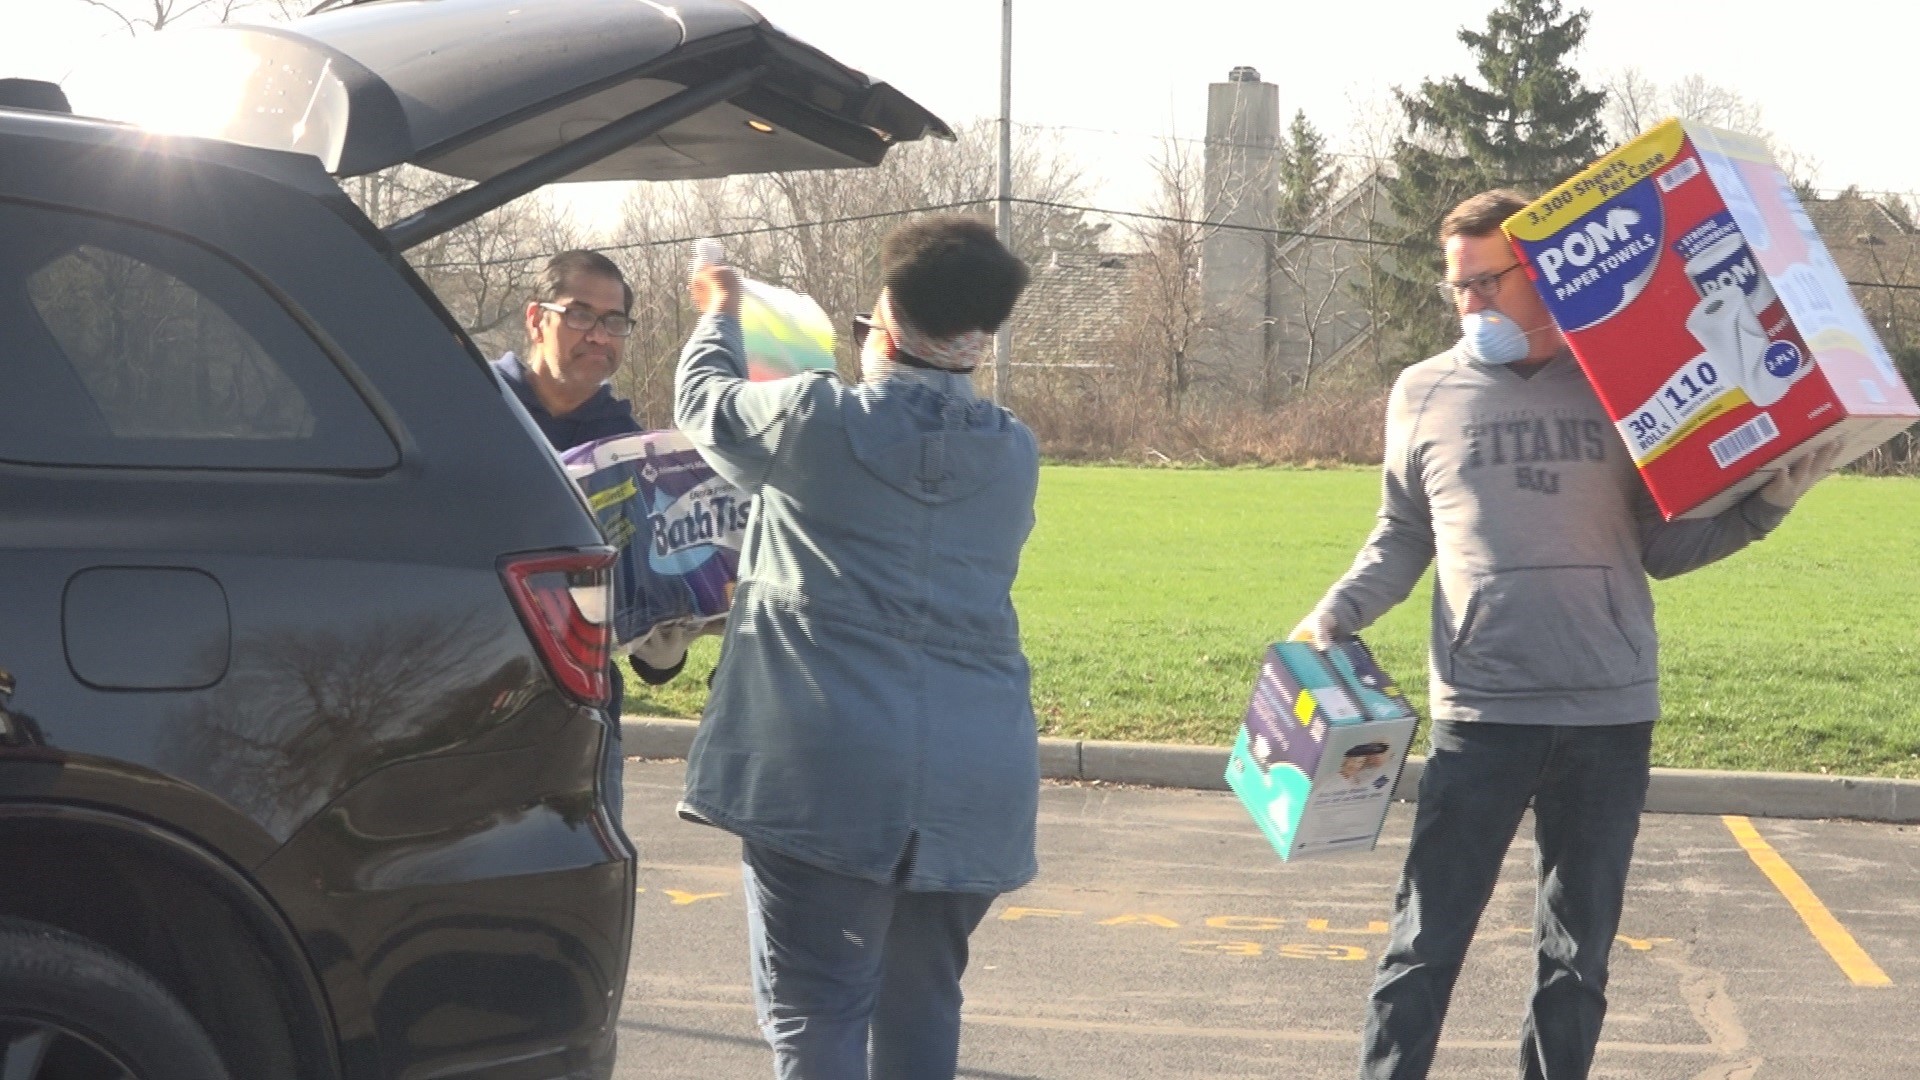 Local schools are stepping in to help collect supplies for essential workers and other members of our community in need.